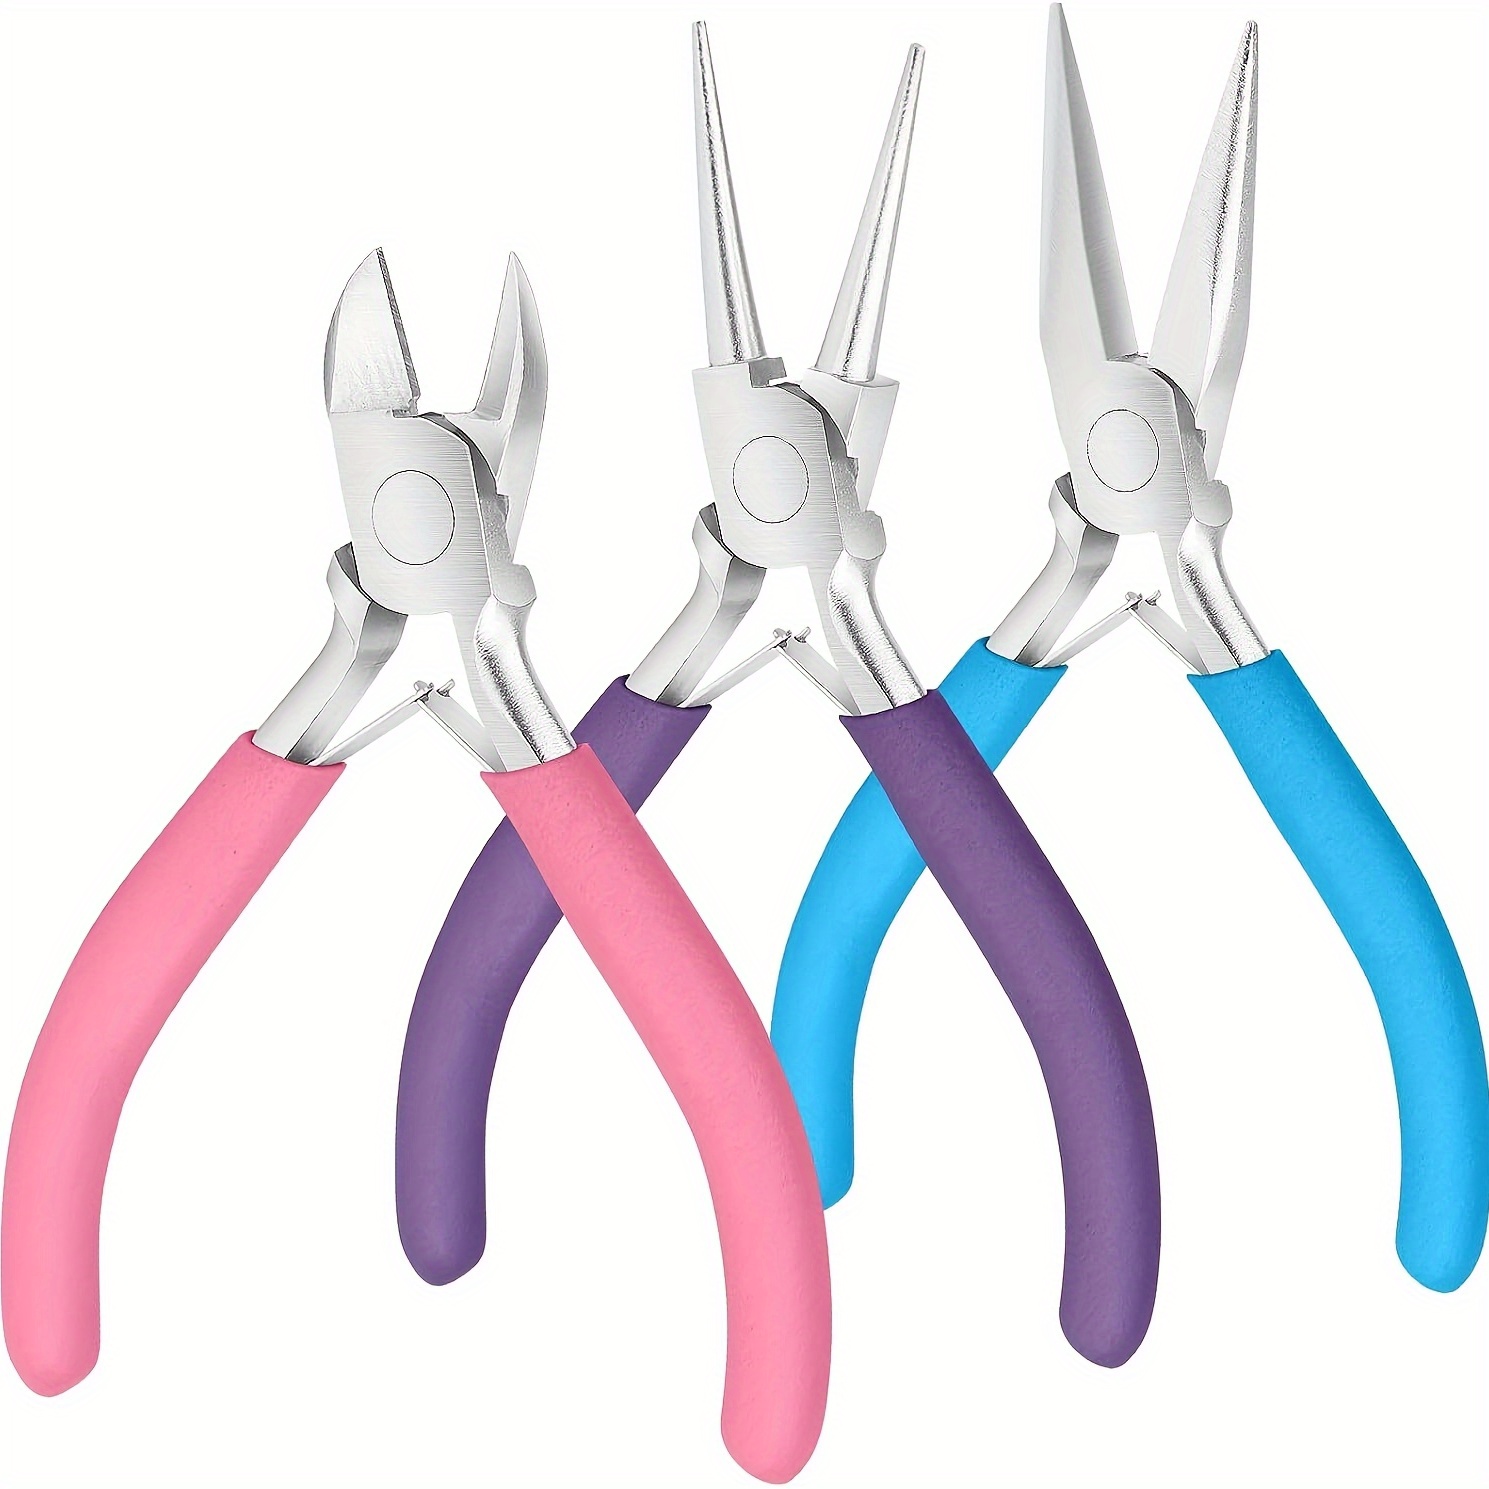 

3-piece Jewelry Making Pliers Set - Needle Nose, Round Nose & Wire Cutter For Diy Crafts, Beading & Repair - Durable Iron Construction Jewelry Making Tools Spacer Beads For Jewelry Making